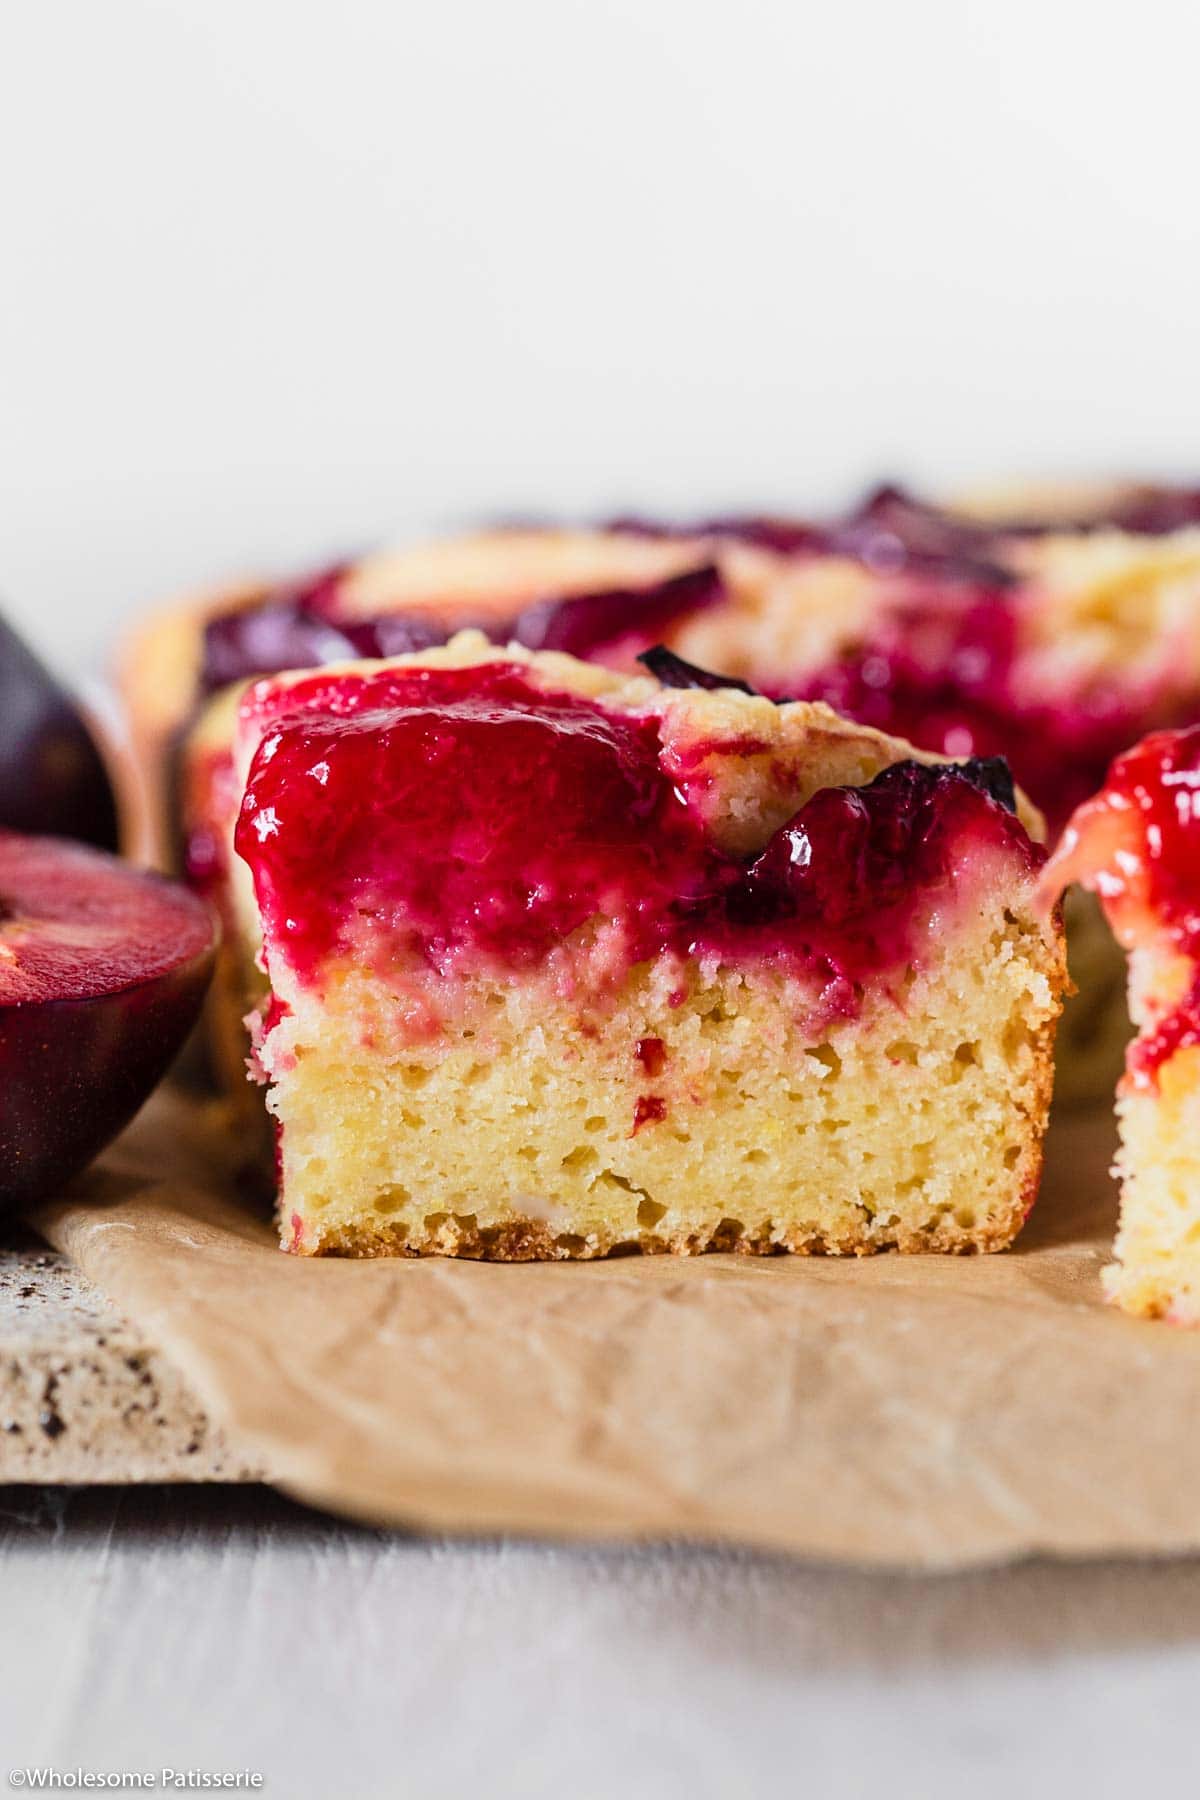 Slice of cake showing the juicy plums